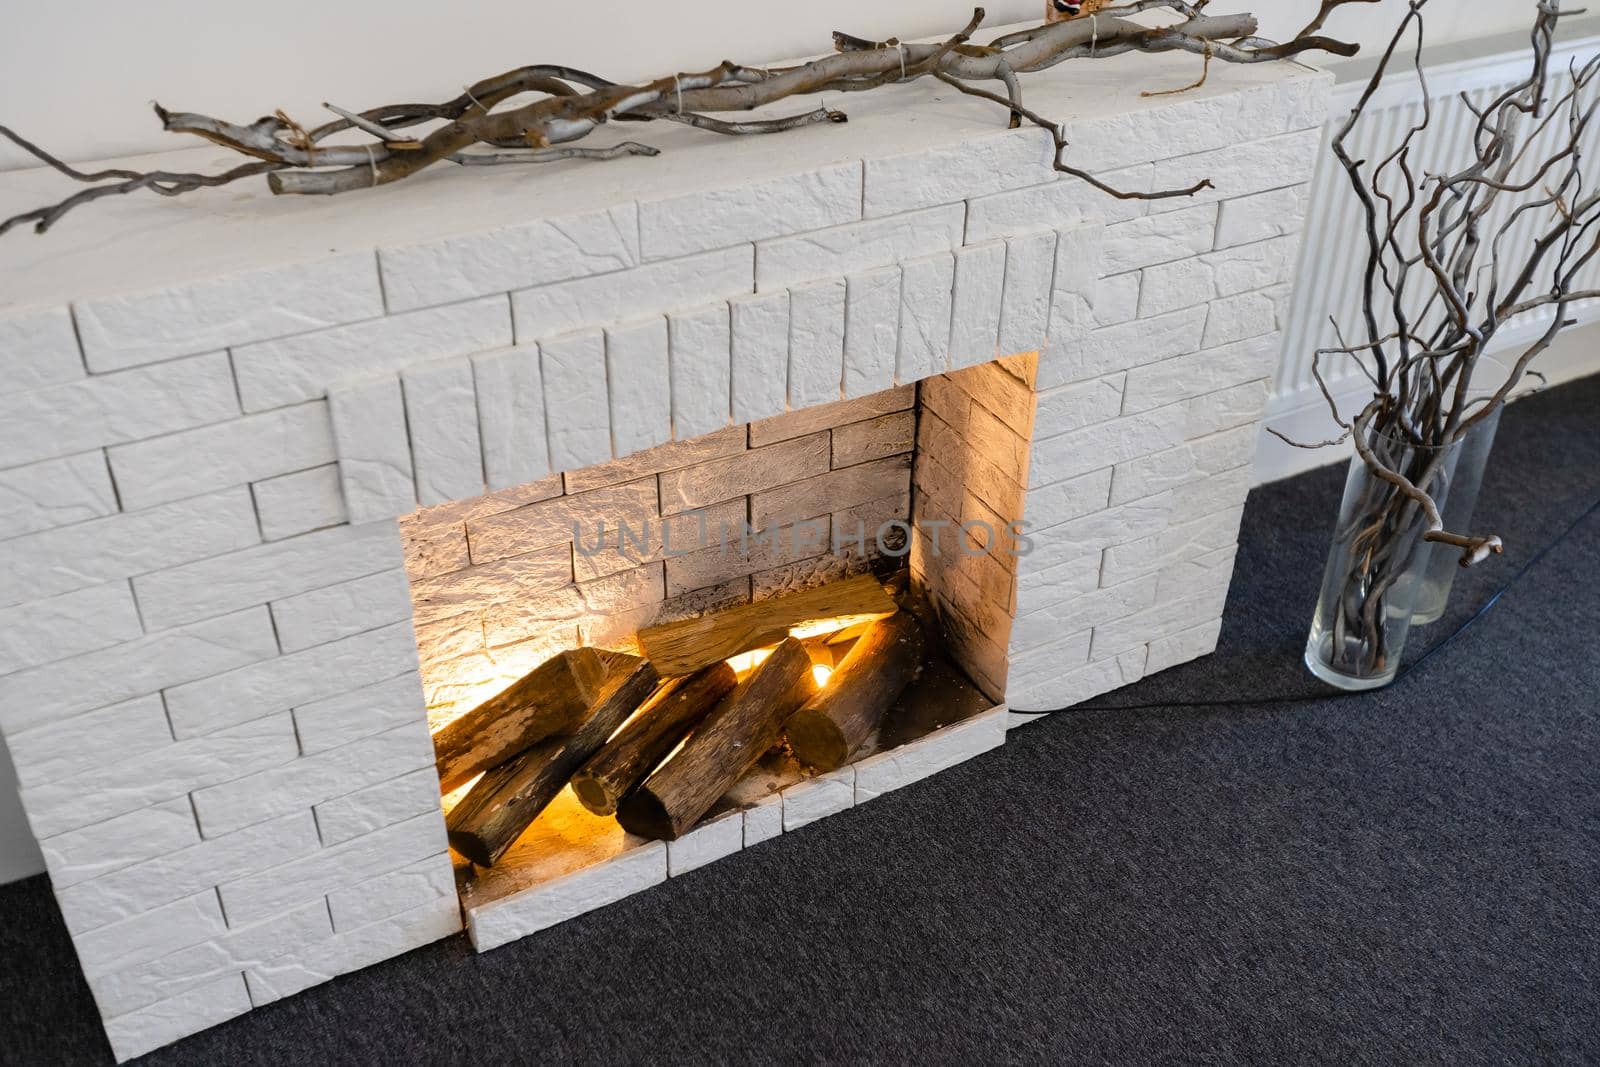 Decorative fireplace on the wall - modern interior. With a white brick